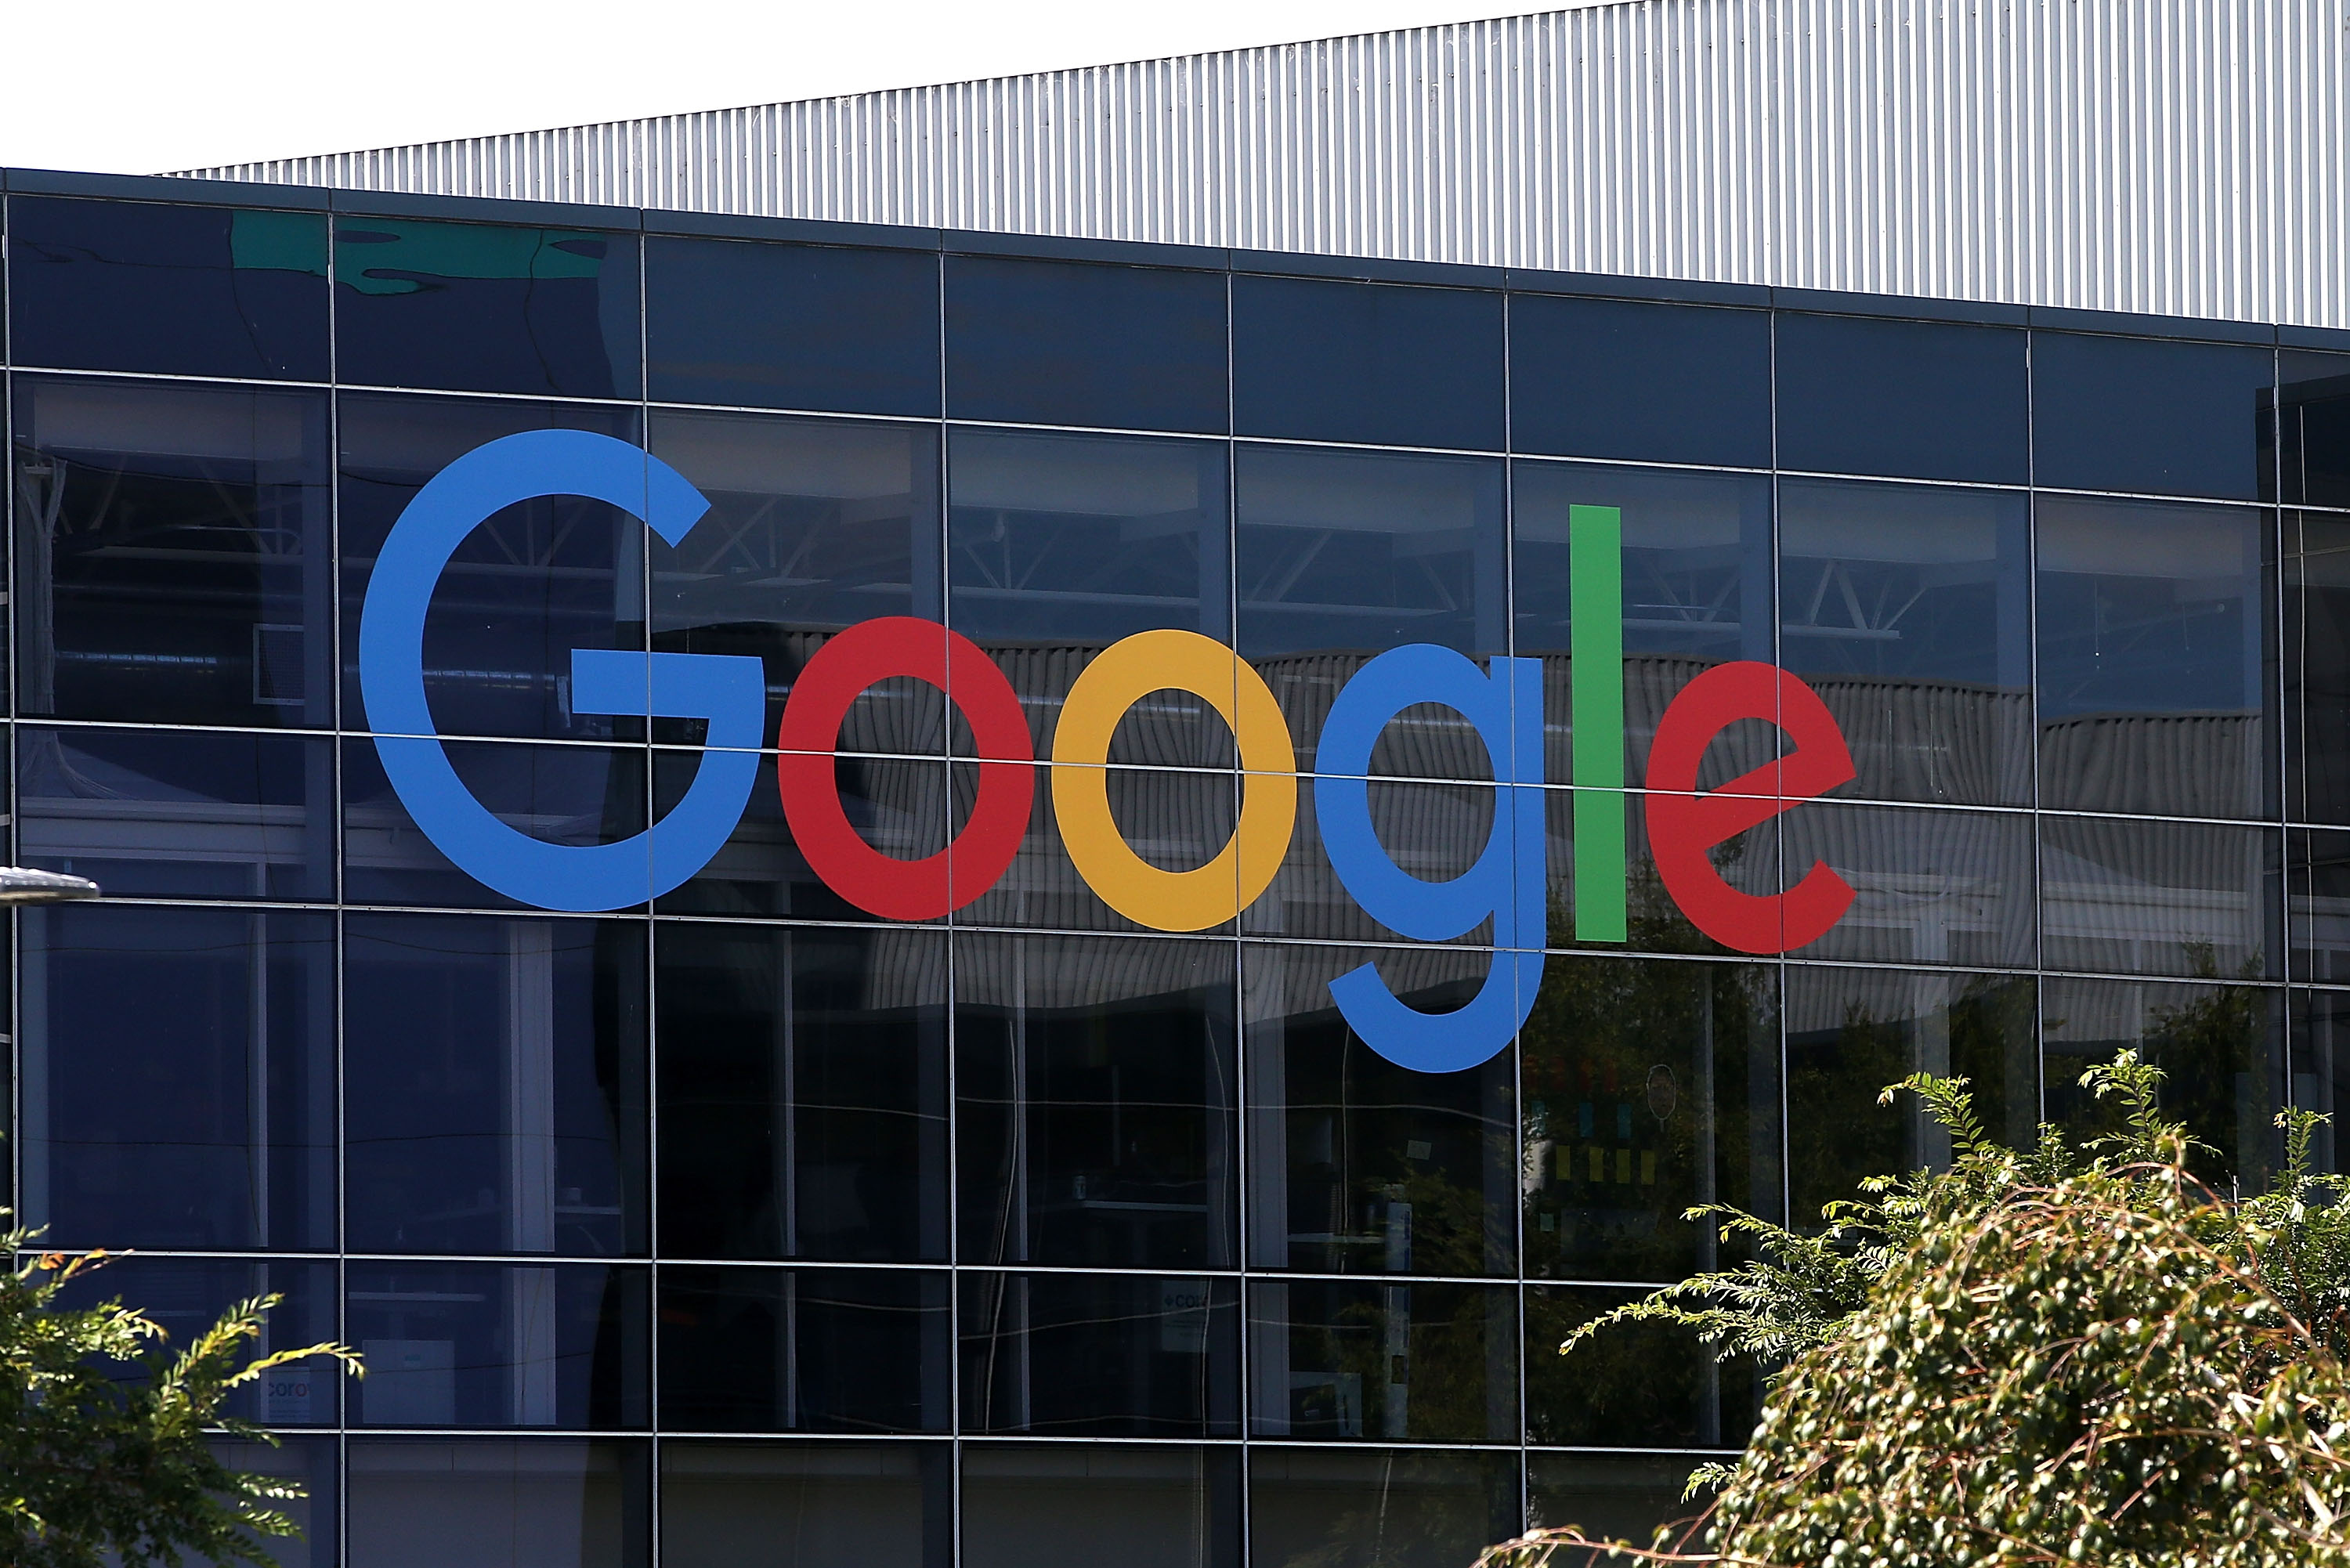 The Google logo is displayed at the Google headquarters on Sept. 2, 2015 in Mountain View, Calif. (Justin Sullivan—Getty Images)